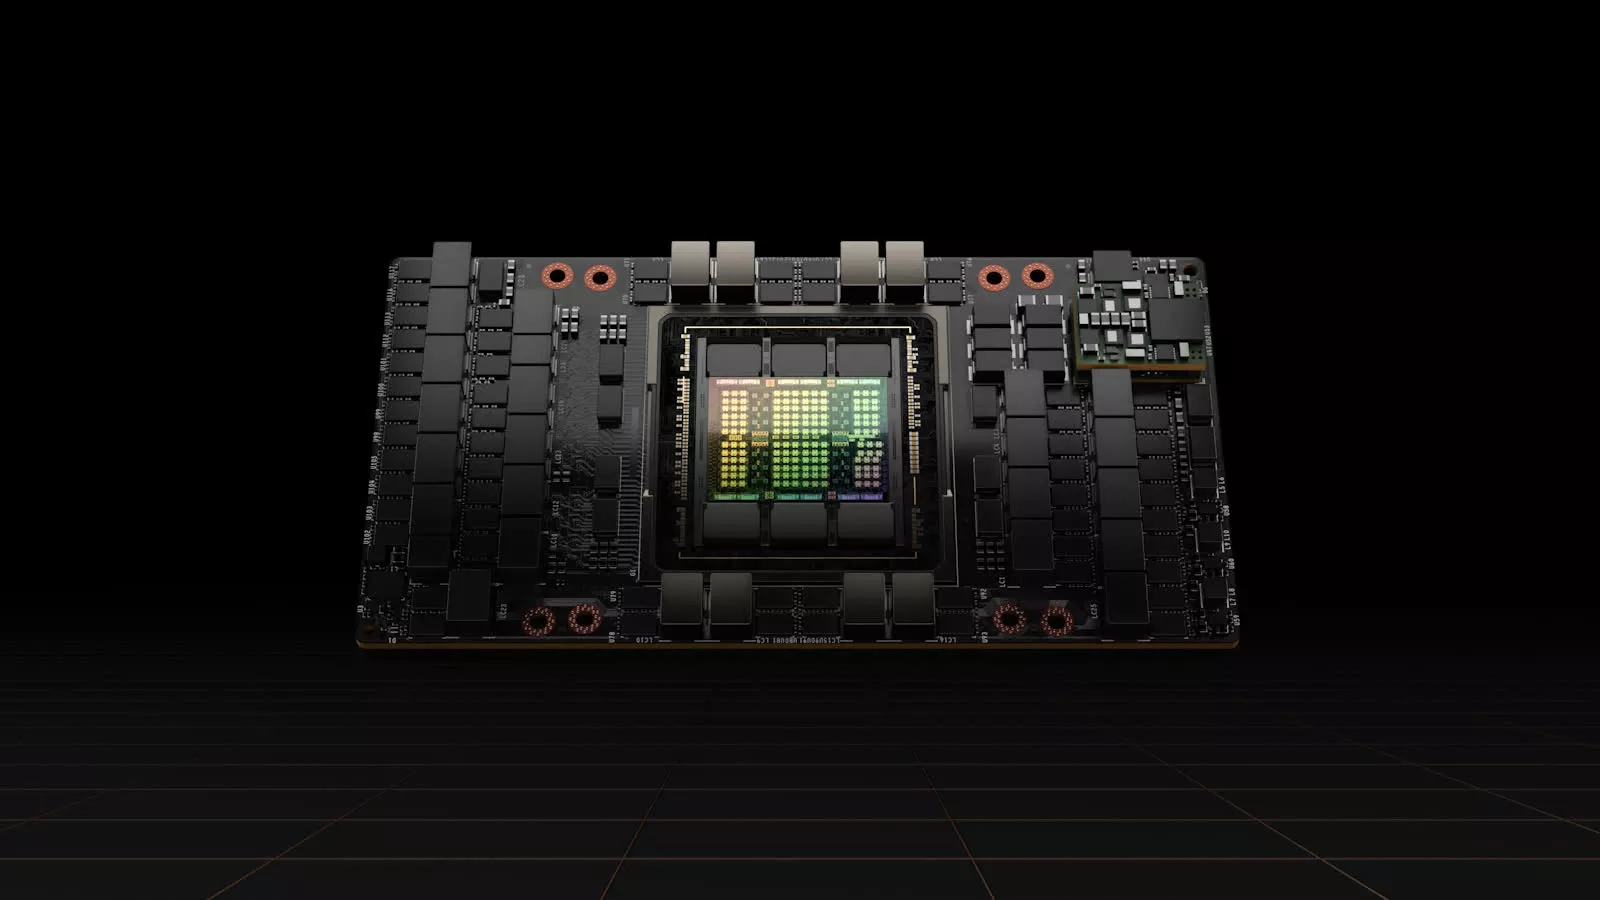 Nvidia's Hopper H100 pictured, features 80GB HBM3 memory and impressive VRM